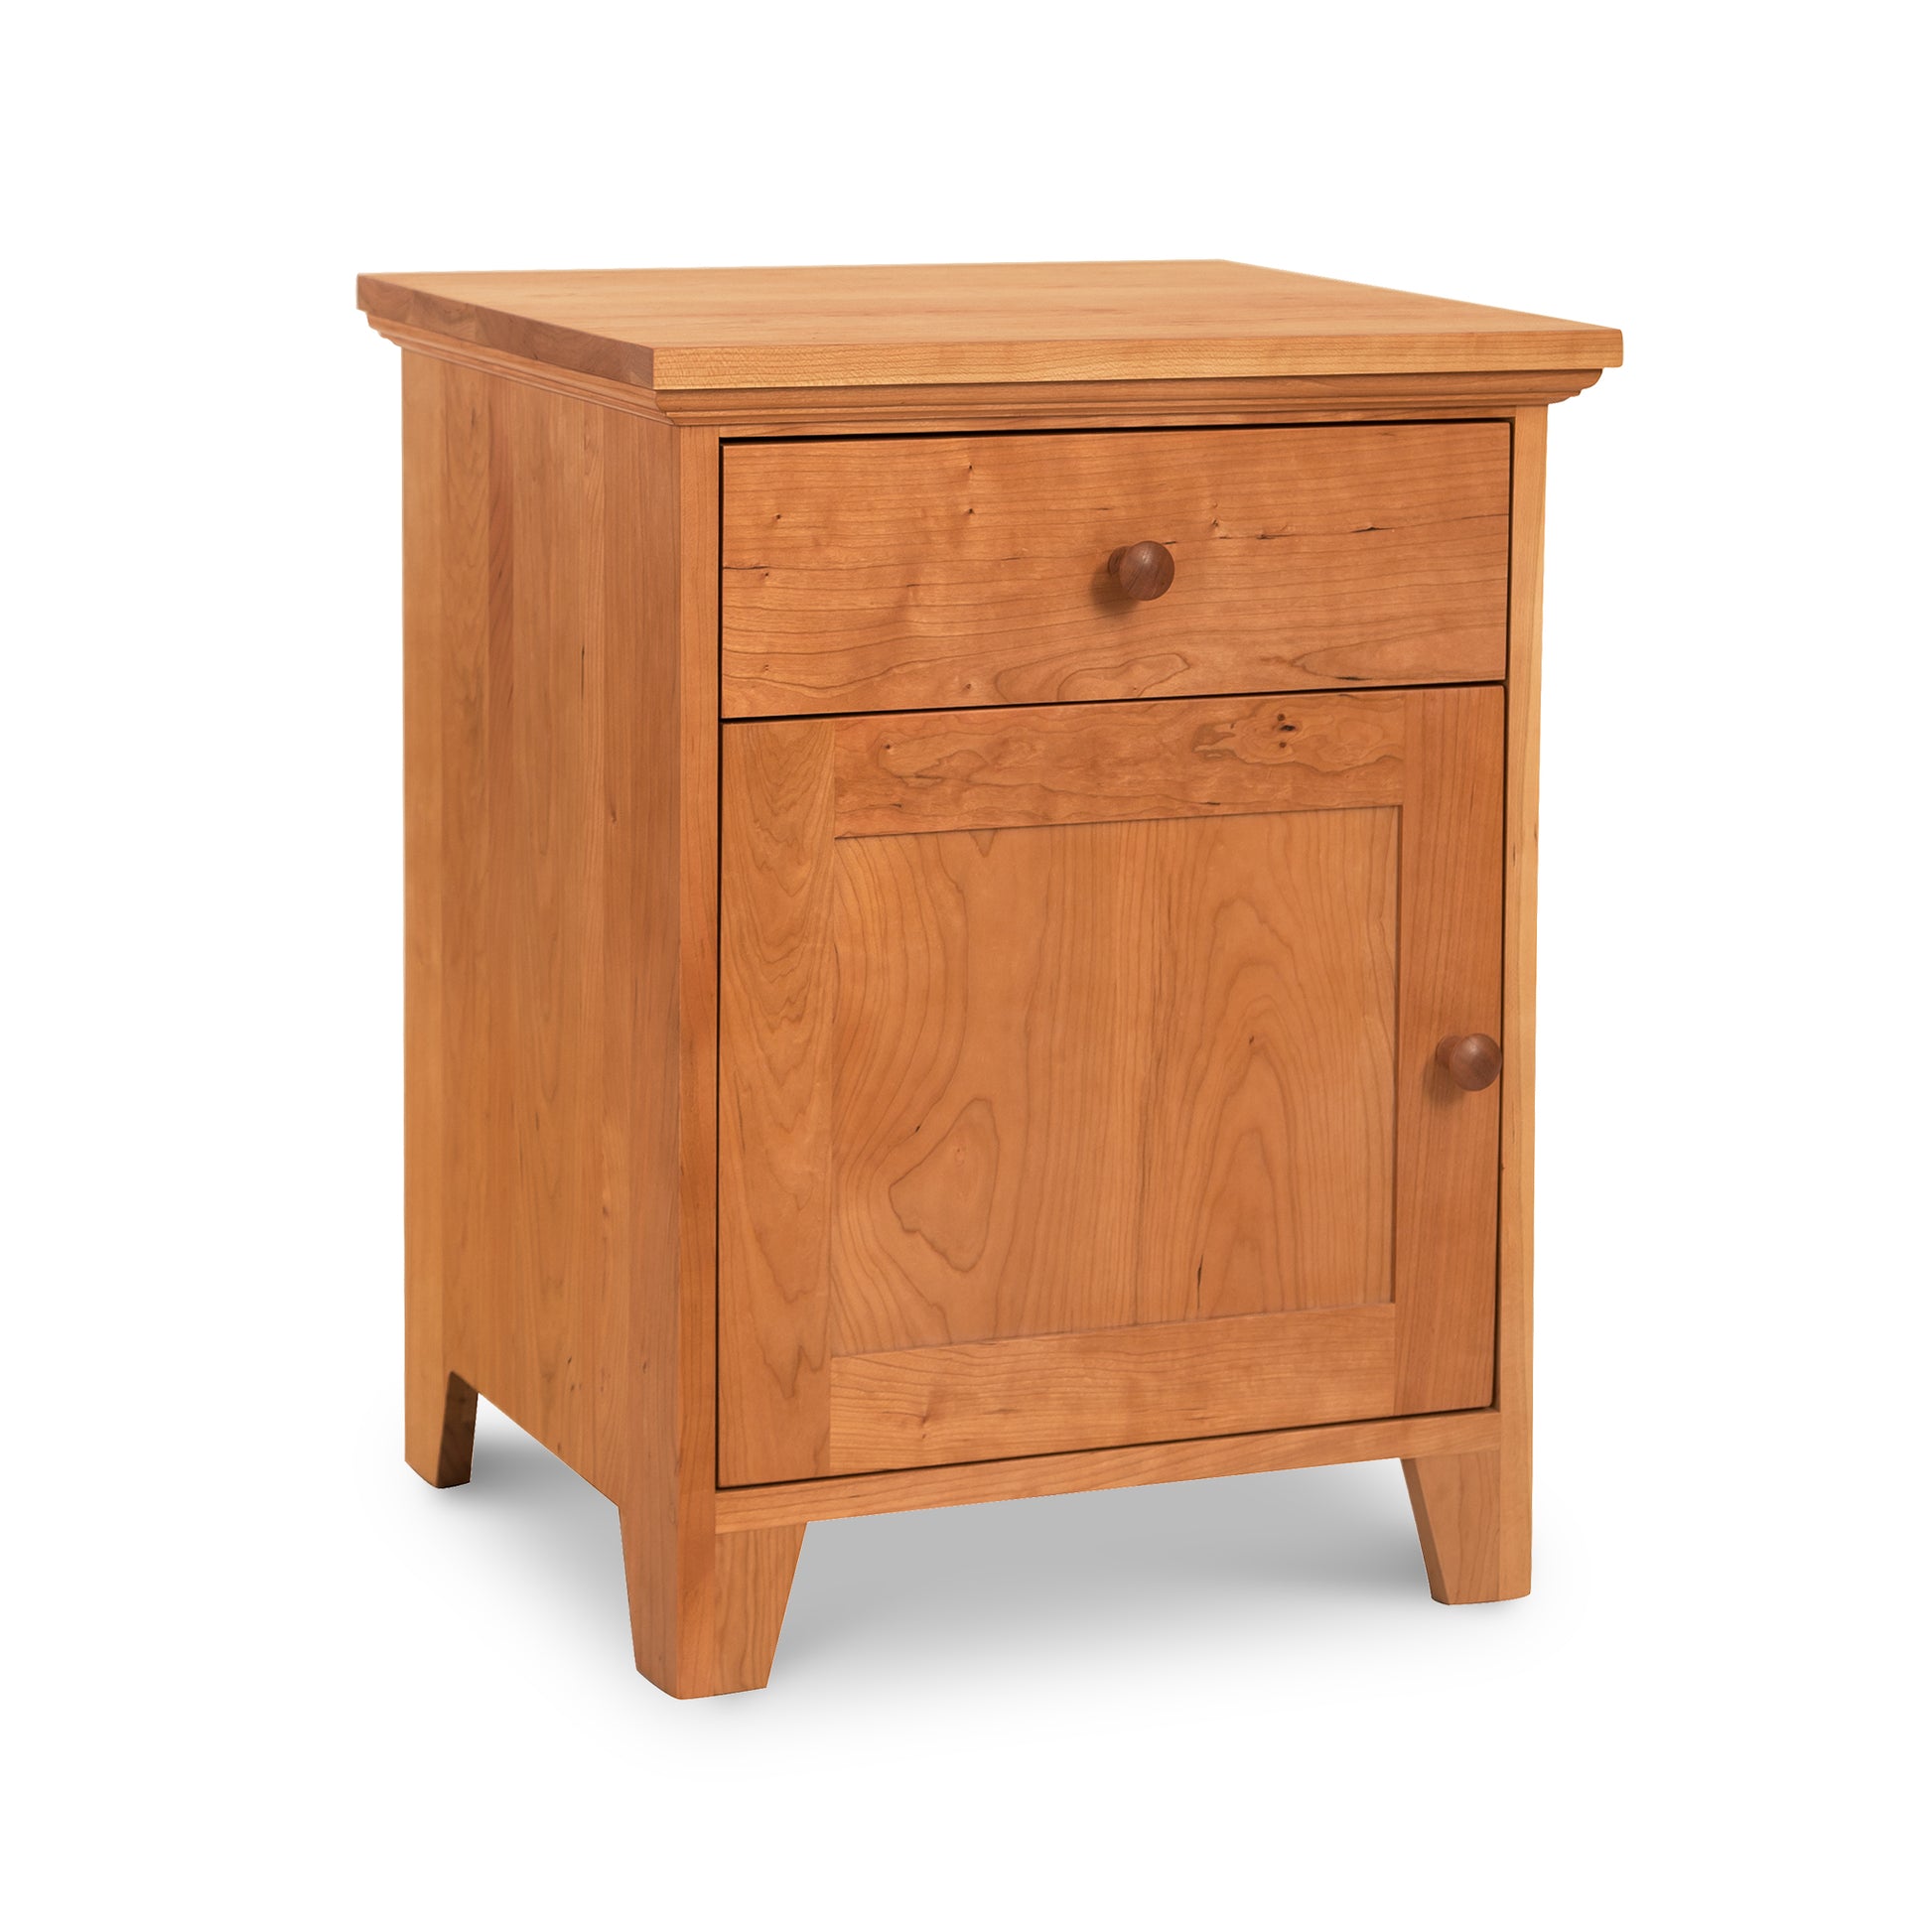 A Lyndon Furniture American Country 1-Drawer Nightstand with Door made of solid wood.